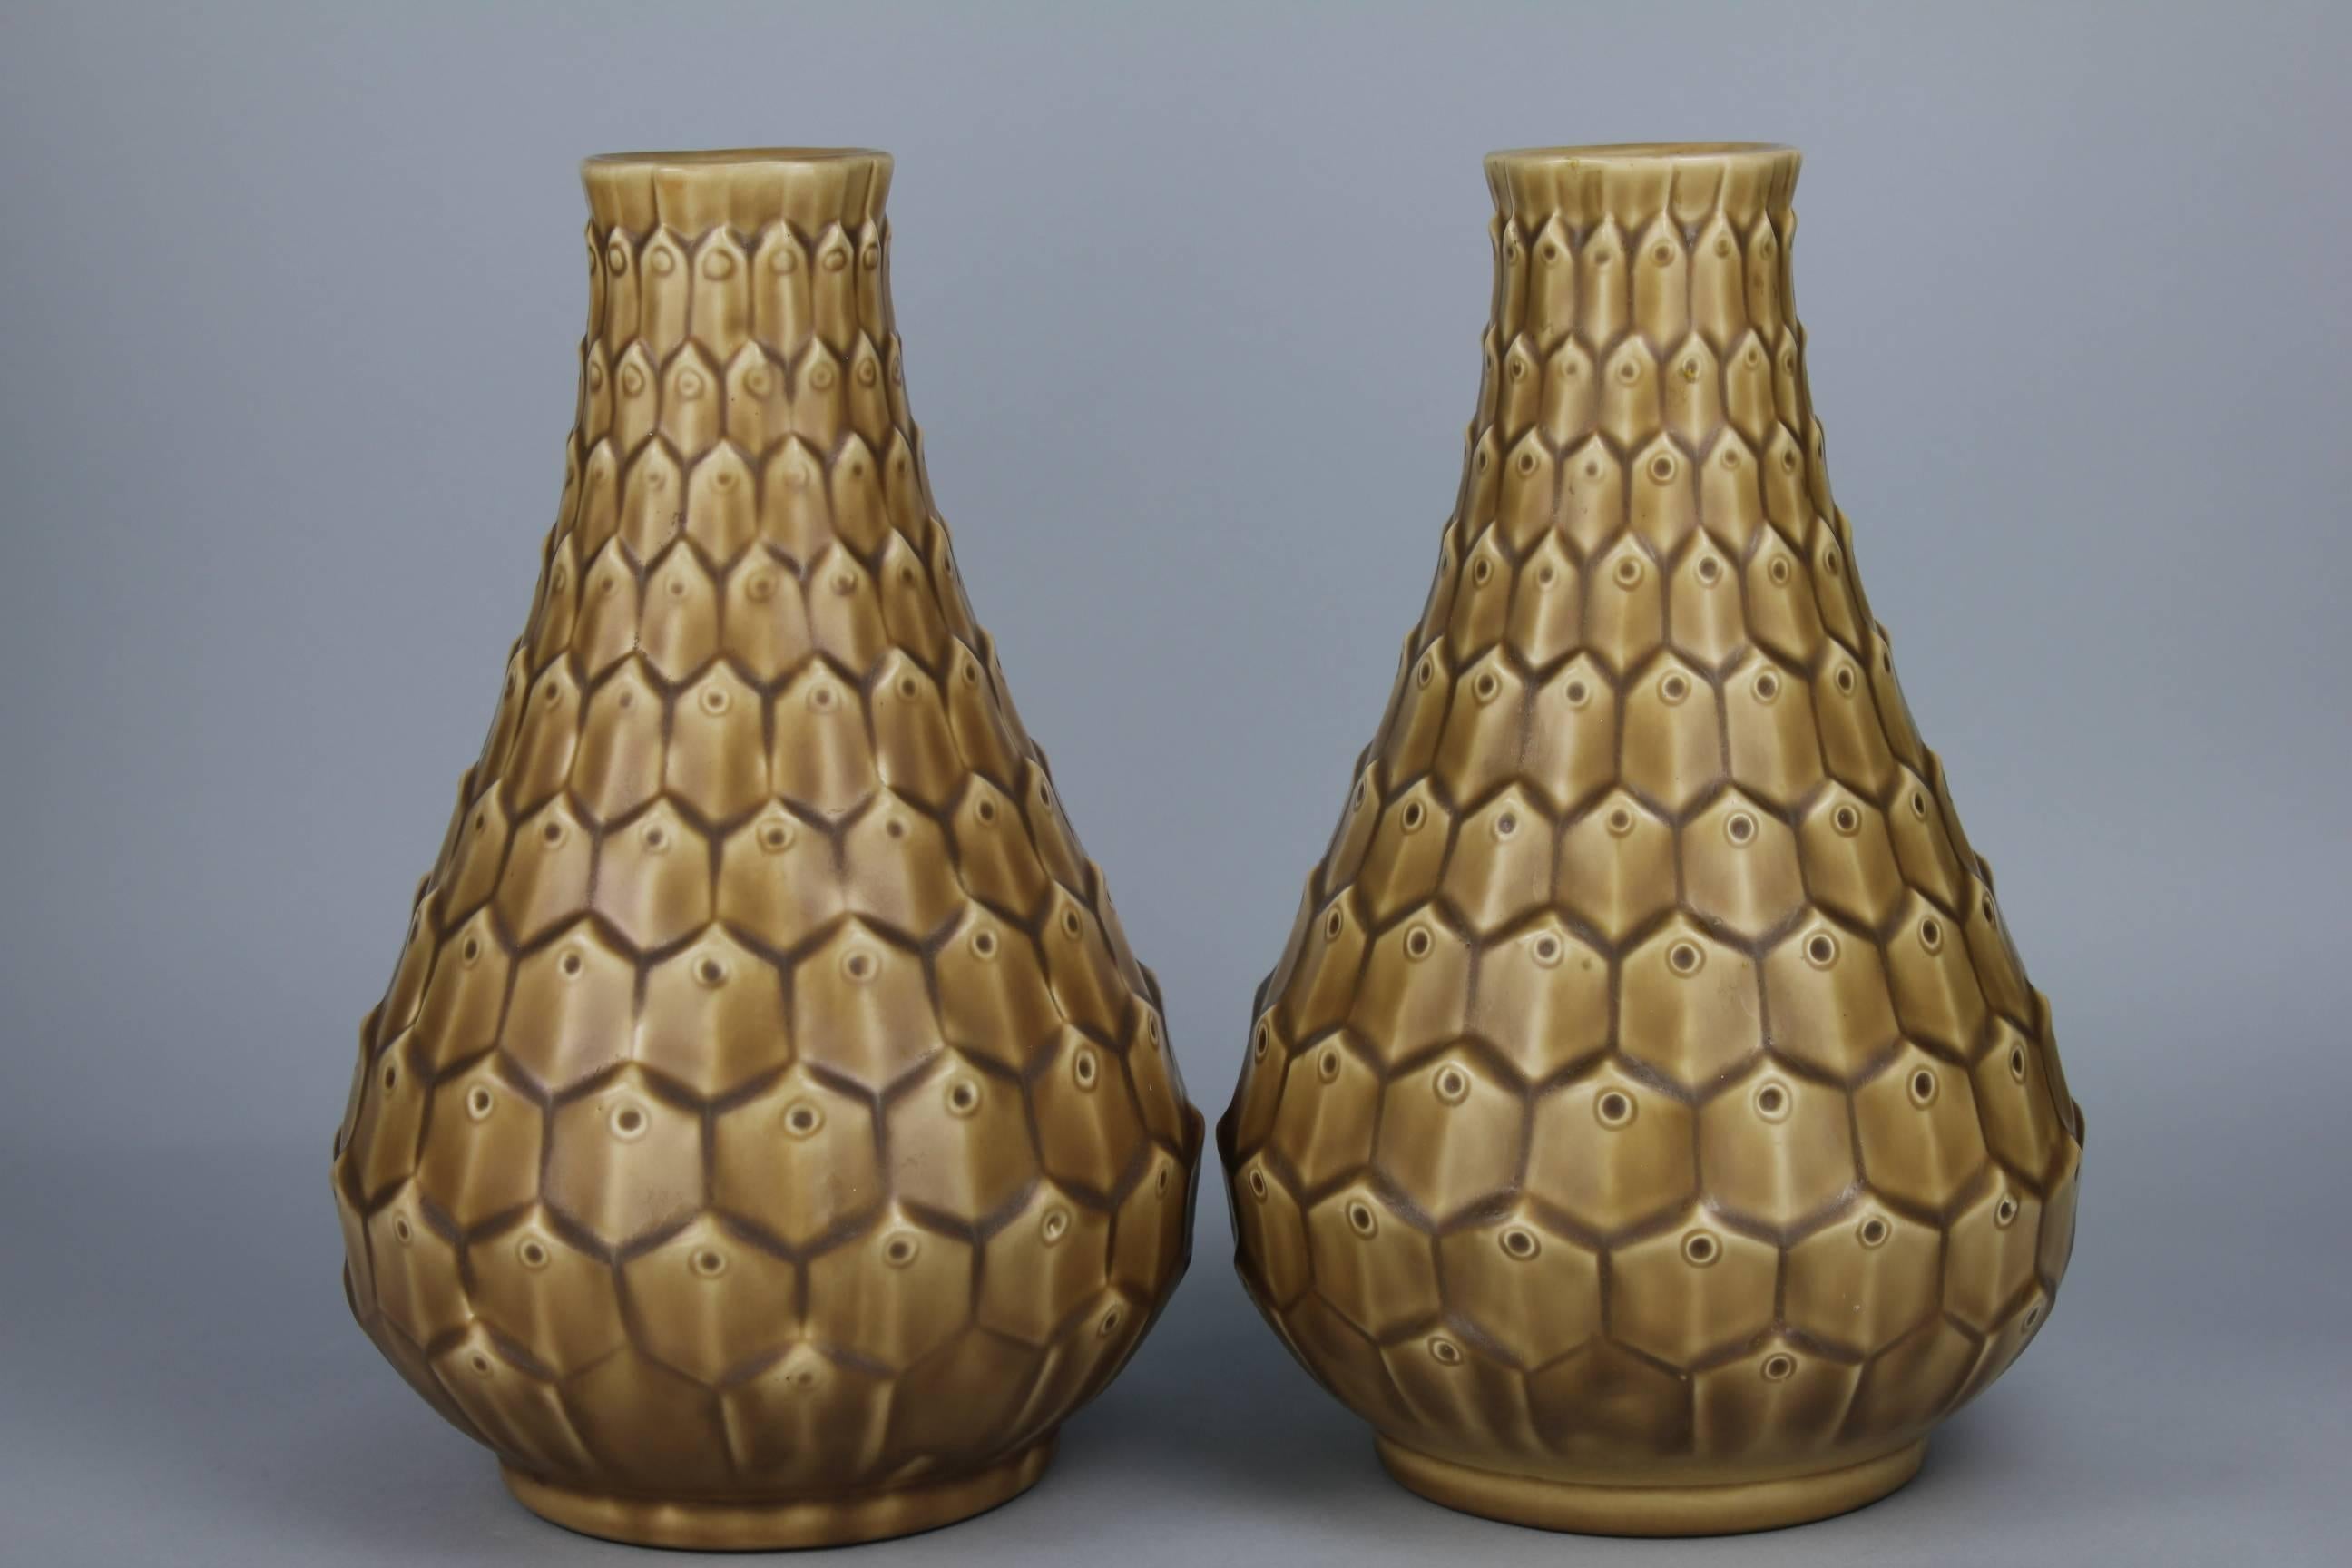 Very rare to see a pair of these lovely vases with peacock pattern. Ewald Dahlskog is the designer and Bo Fajans the maker. These Swedish ceramic vases are from the 1950s. The condition is perfect.